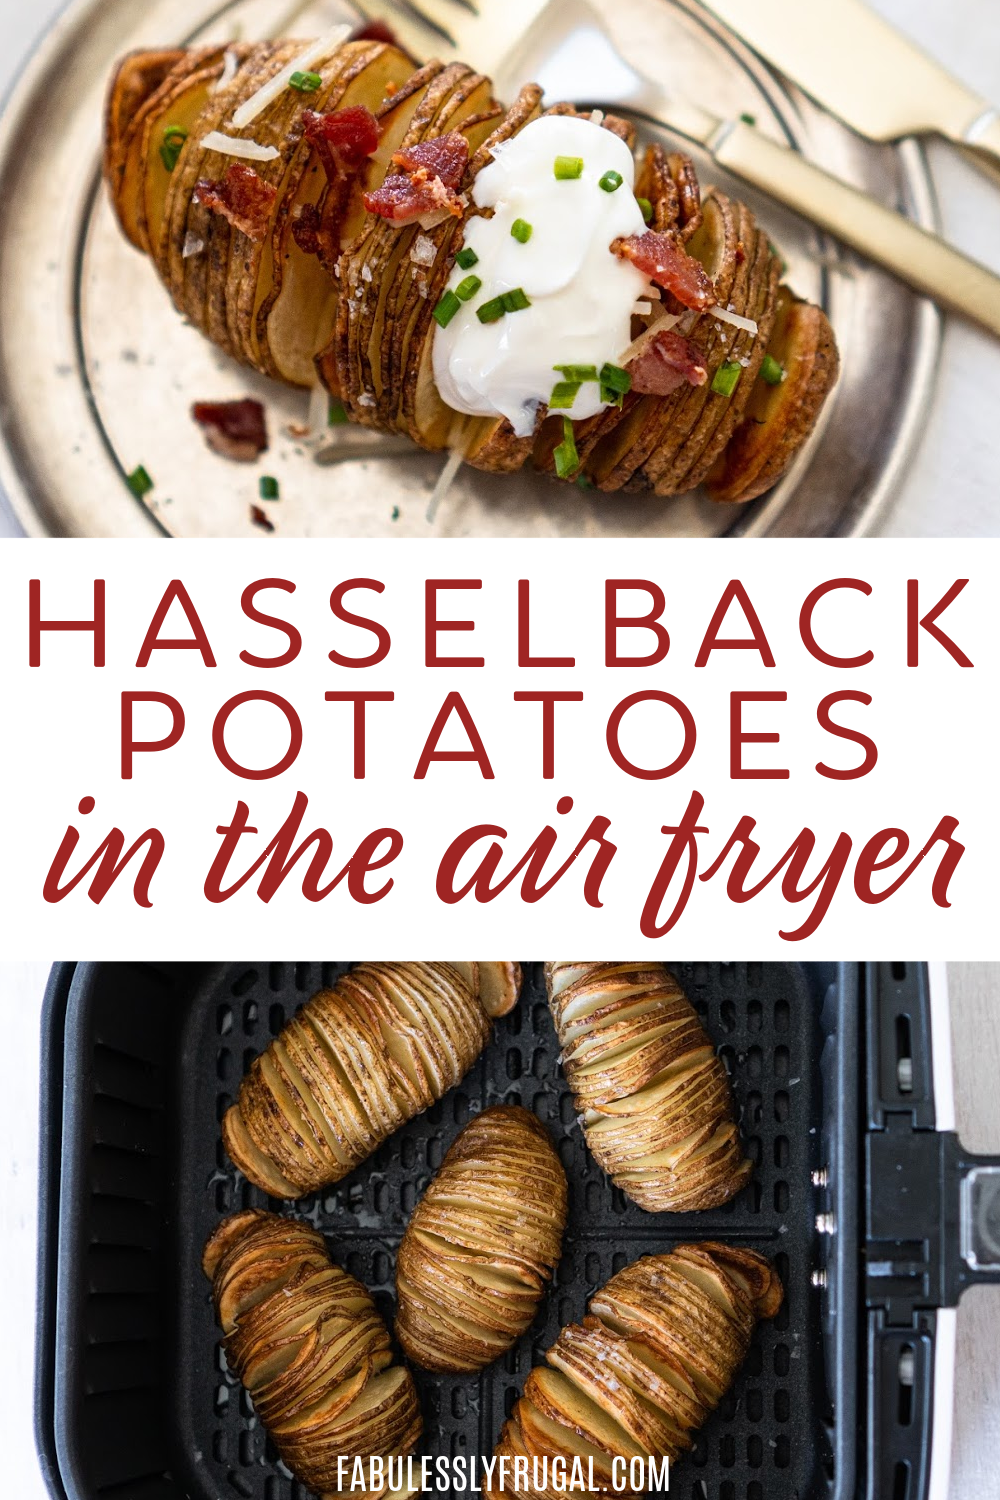 Hasselback potatoes in the air fryer are fun and easy